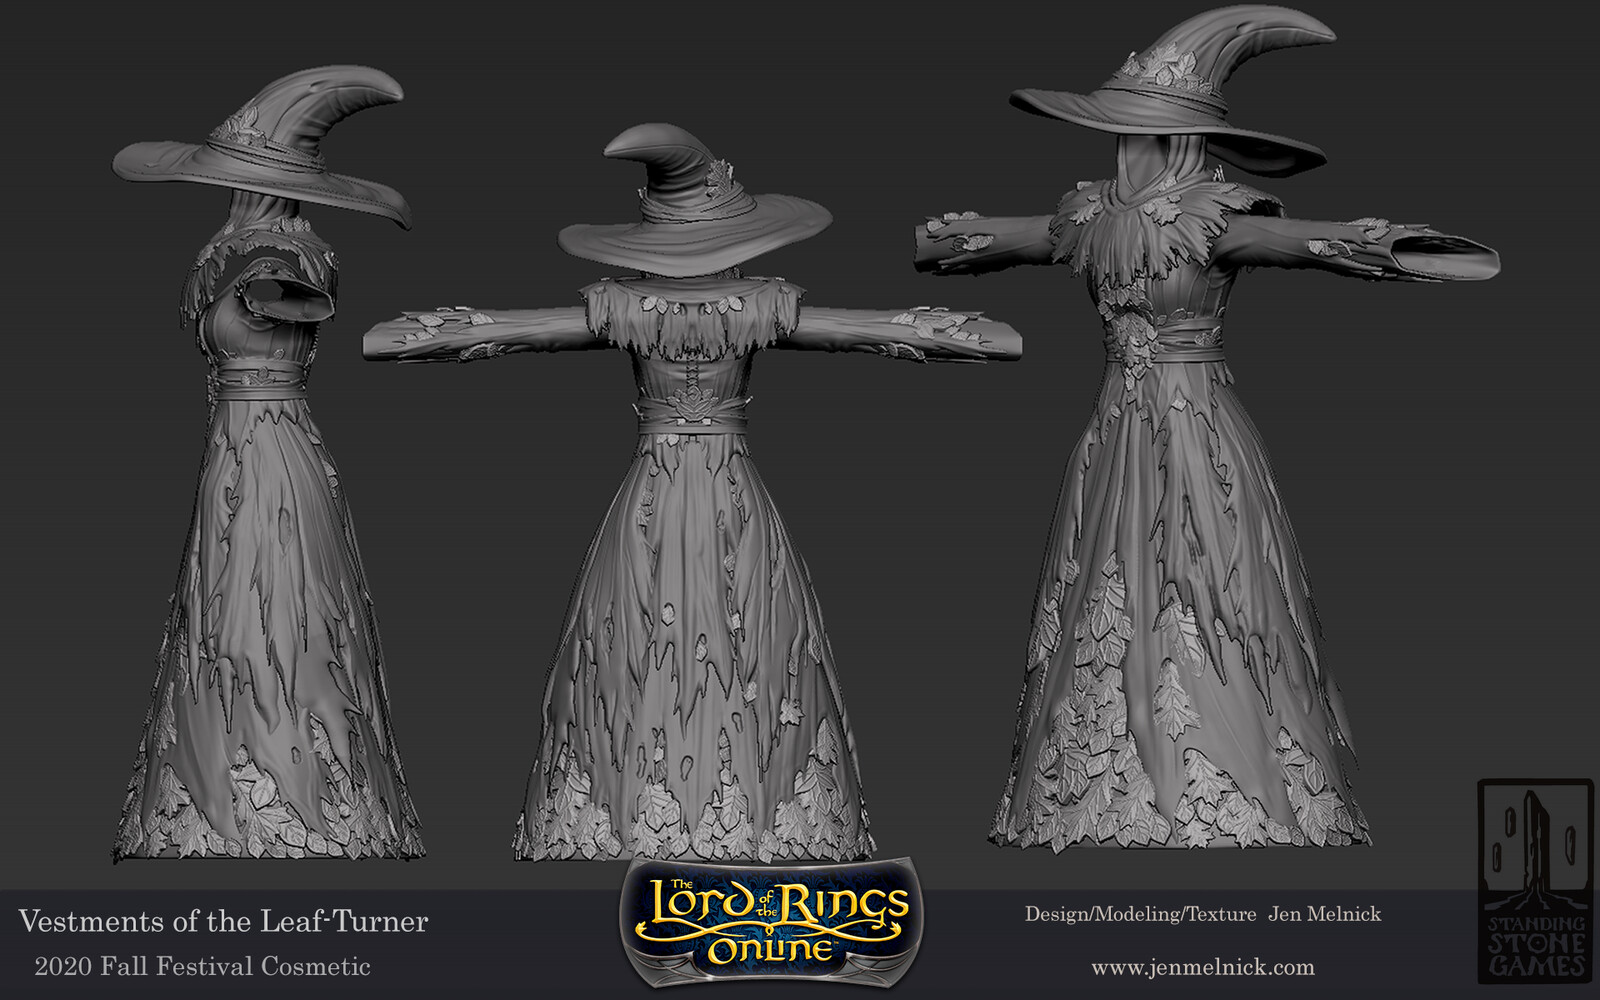 Lord of the Rings Online
Vestments of the Autumn Sage
Fall Festival 2020
Dress, Shoulders, and Hat sculpts